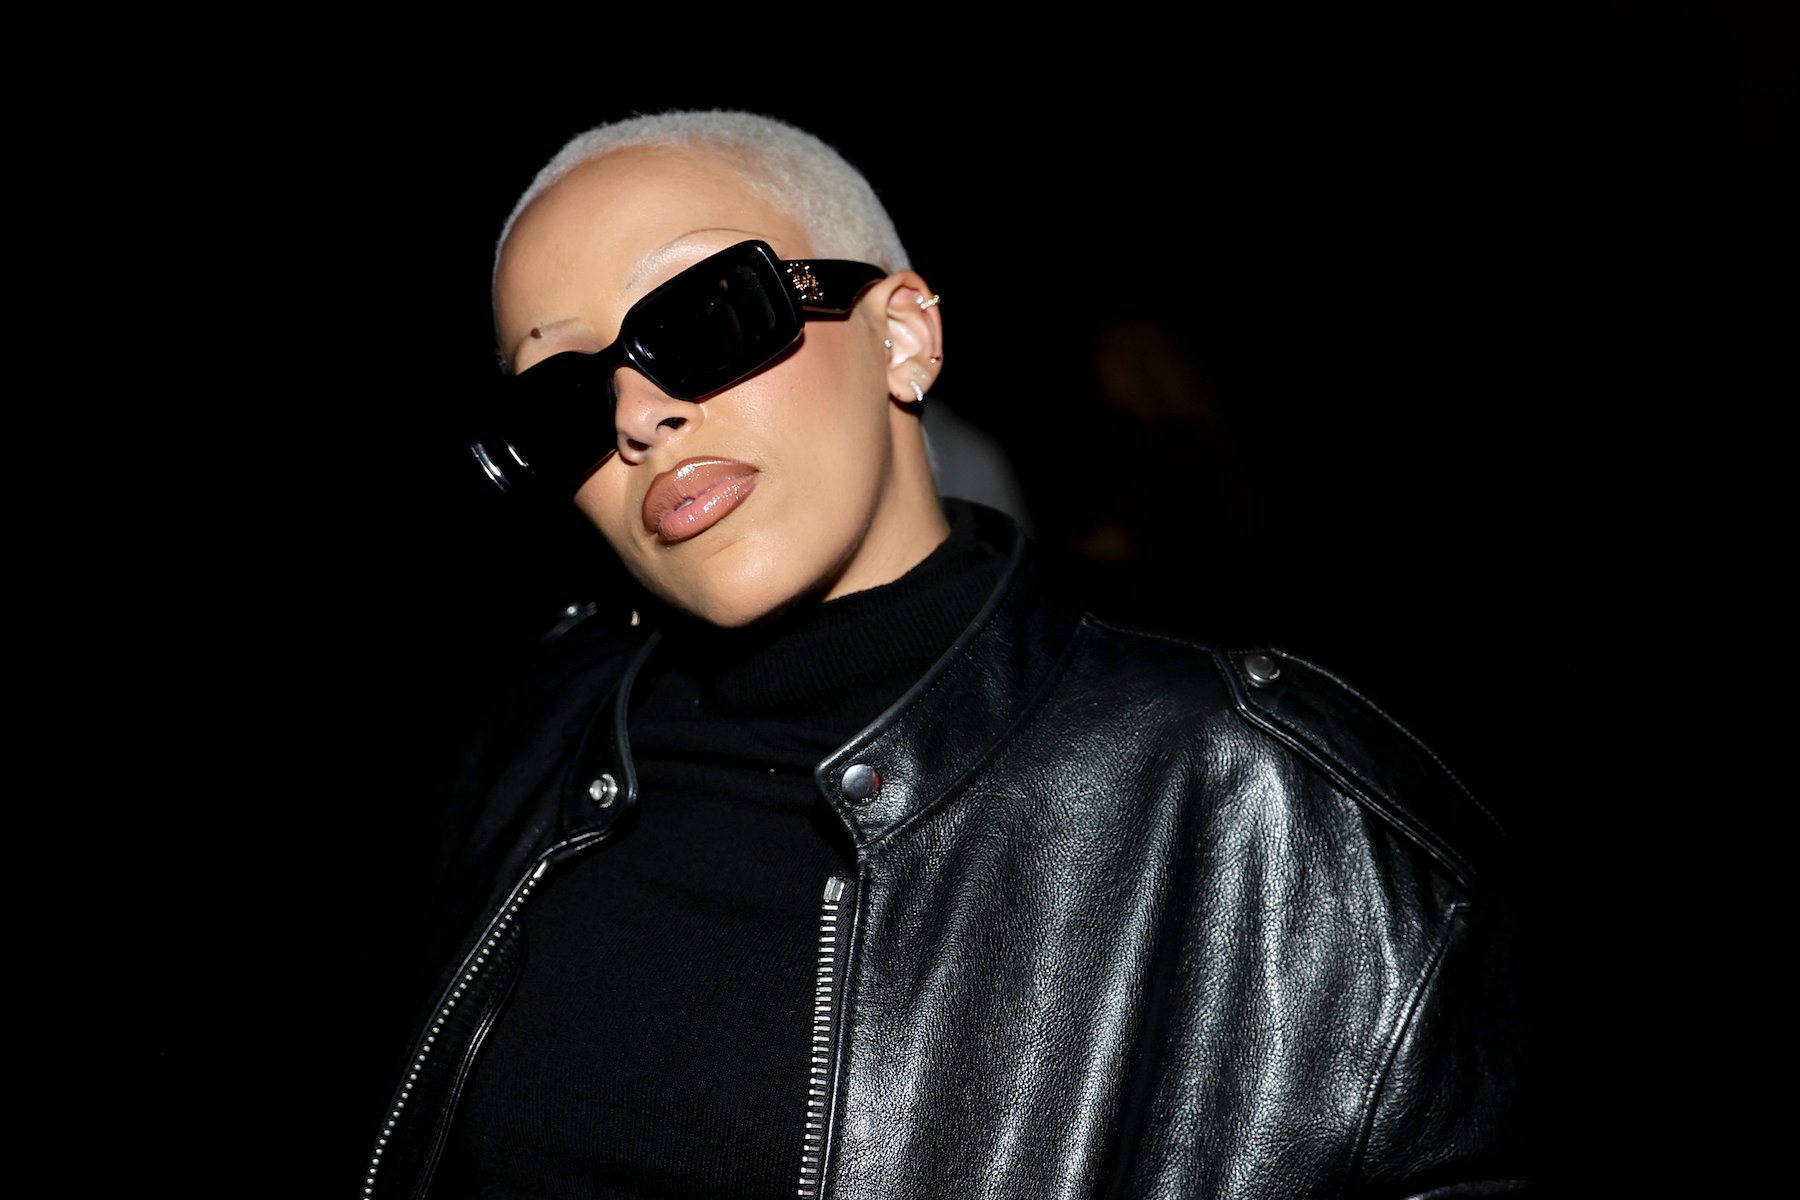 Doja Cat, who came under controversy for being in 'incel' chat rooms online, posing for a photo wearing sunglasses and a black leather jacket